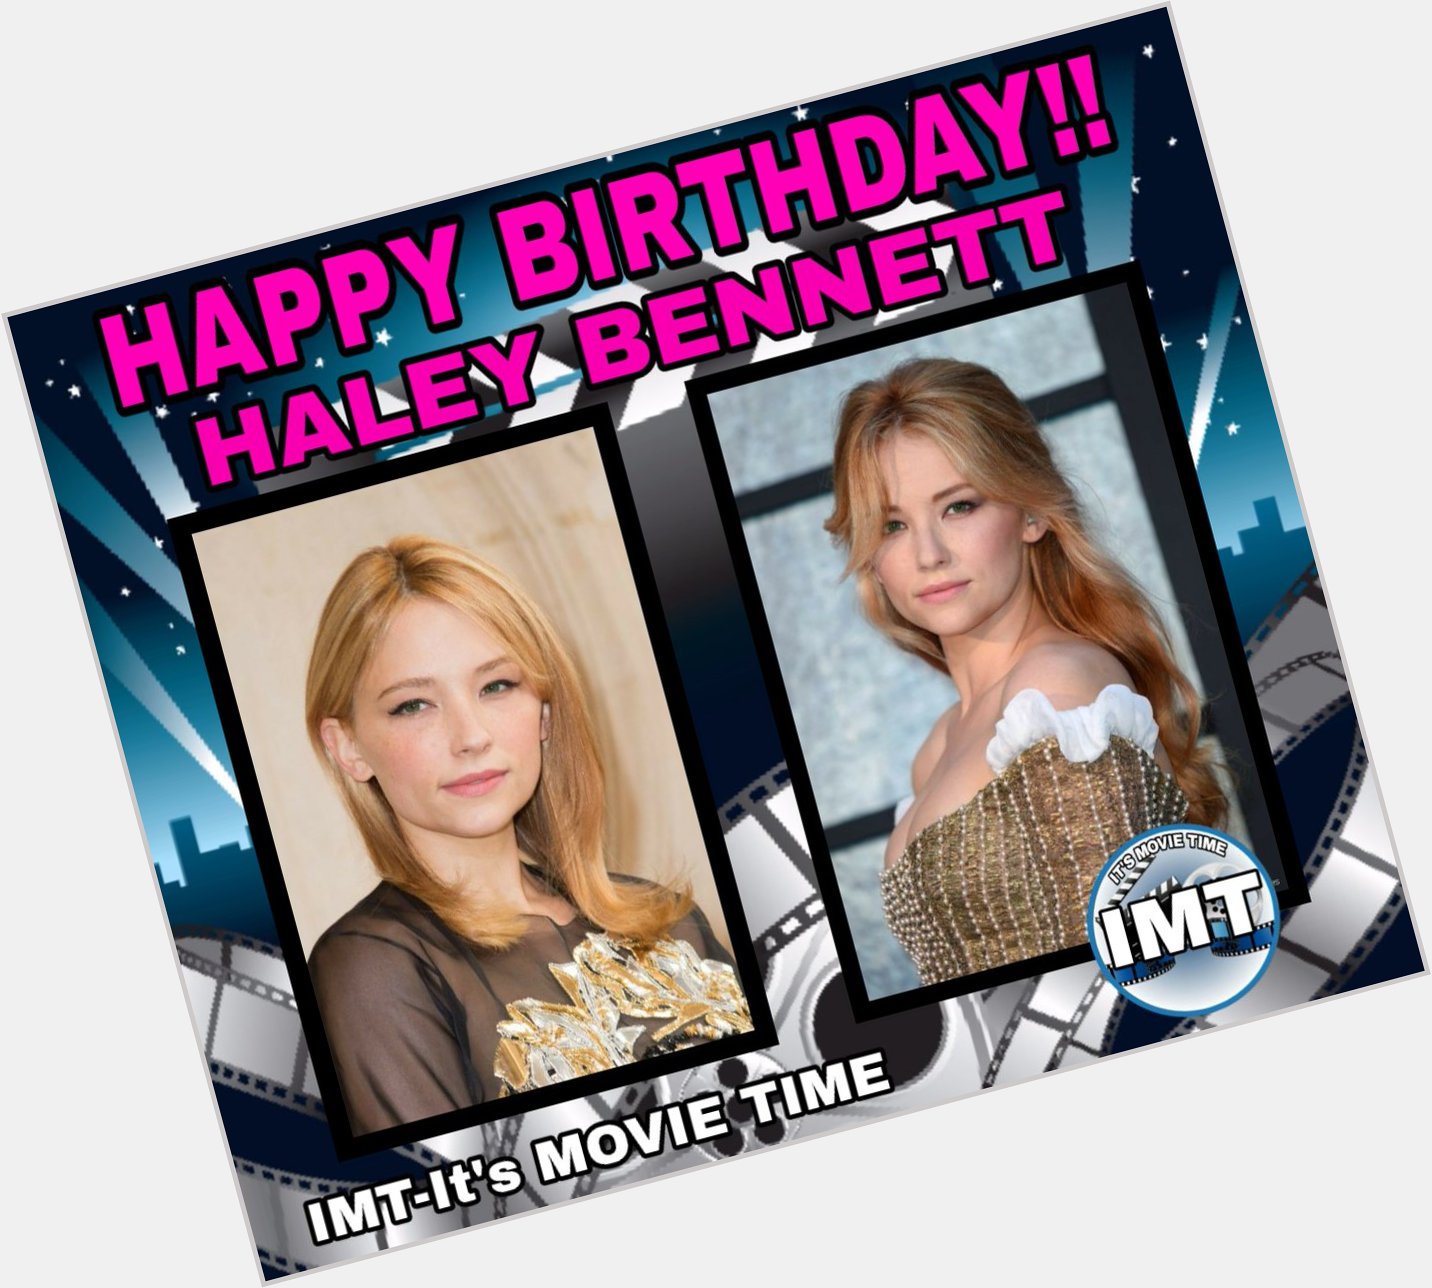 Happy Birthday to the Beautiful Haley Bennett! The actress is celebrating 32 years. 